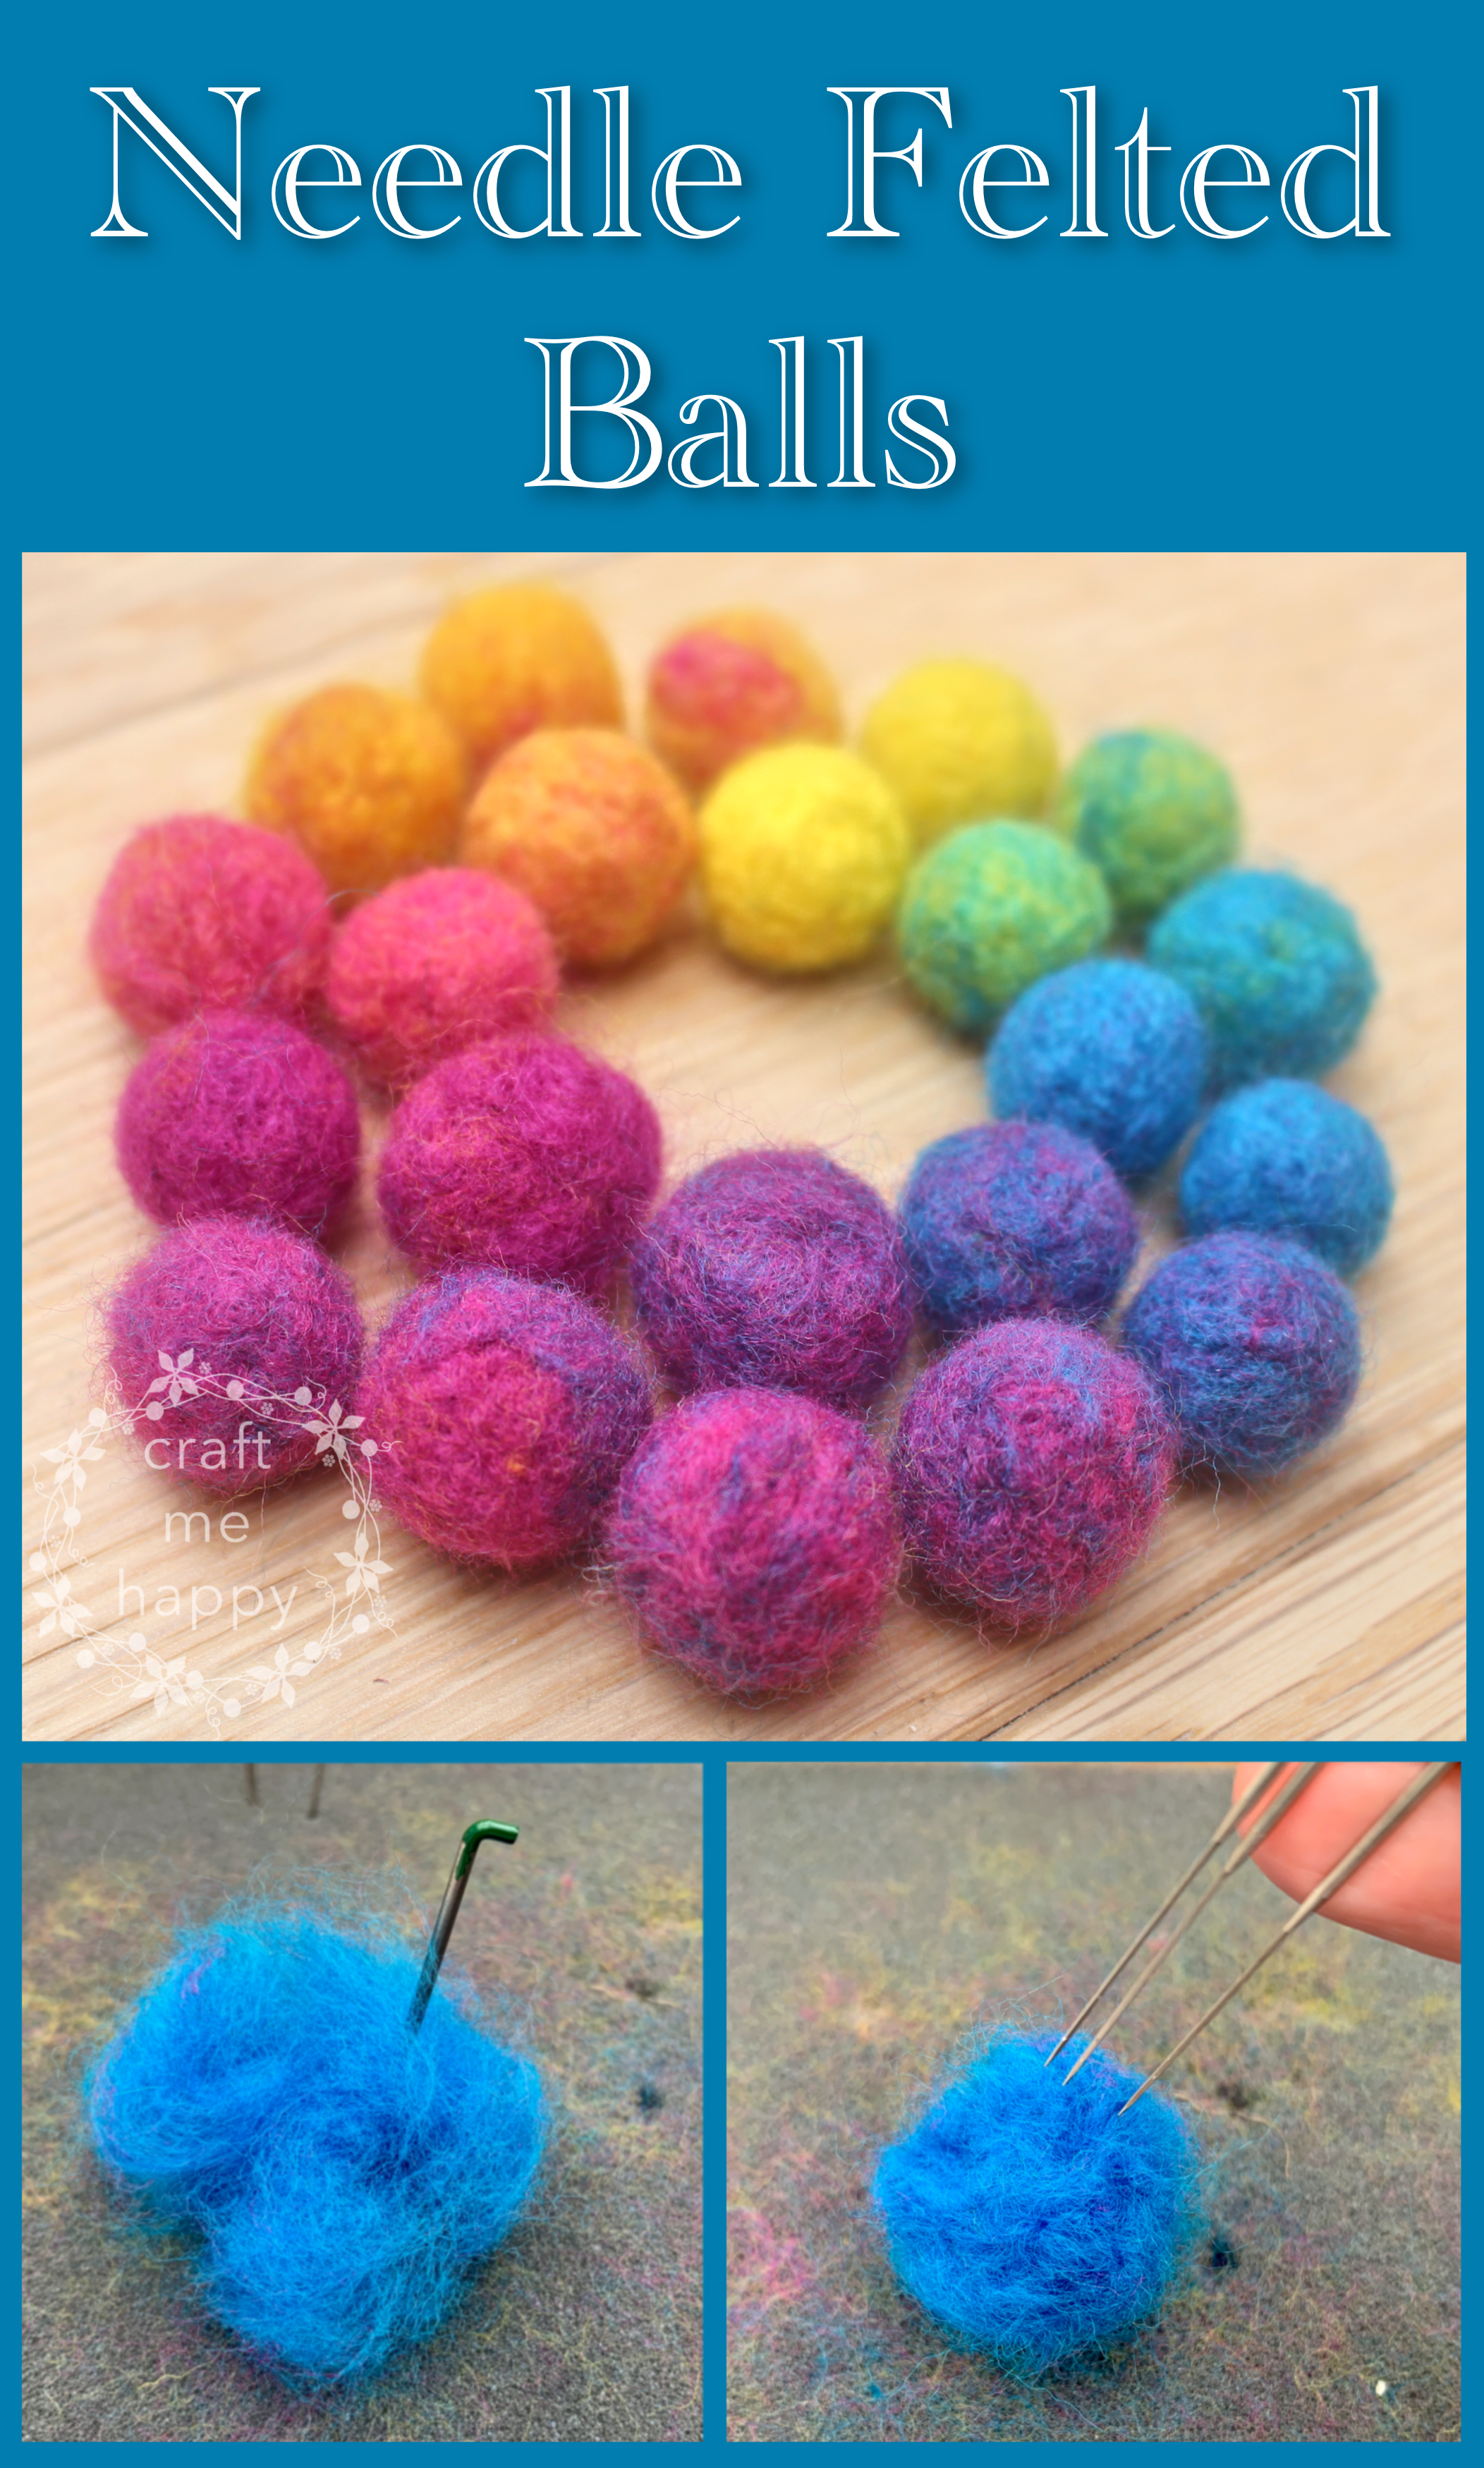 How To Make Felt Balls For Your Next Crafting Projects, DIY Projects